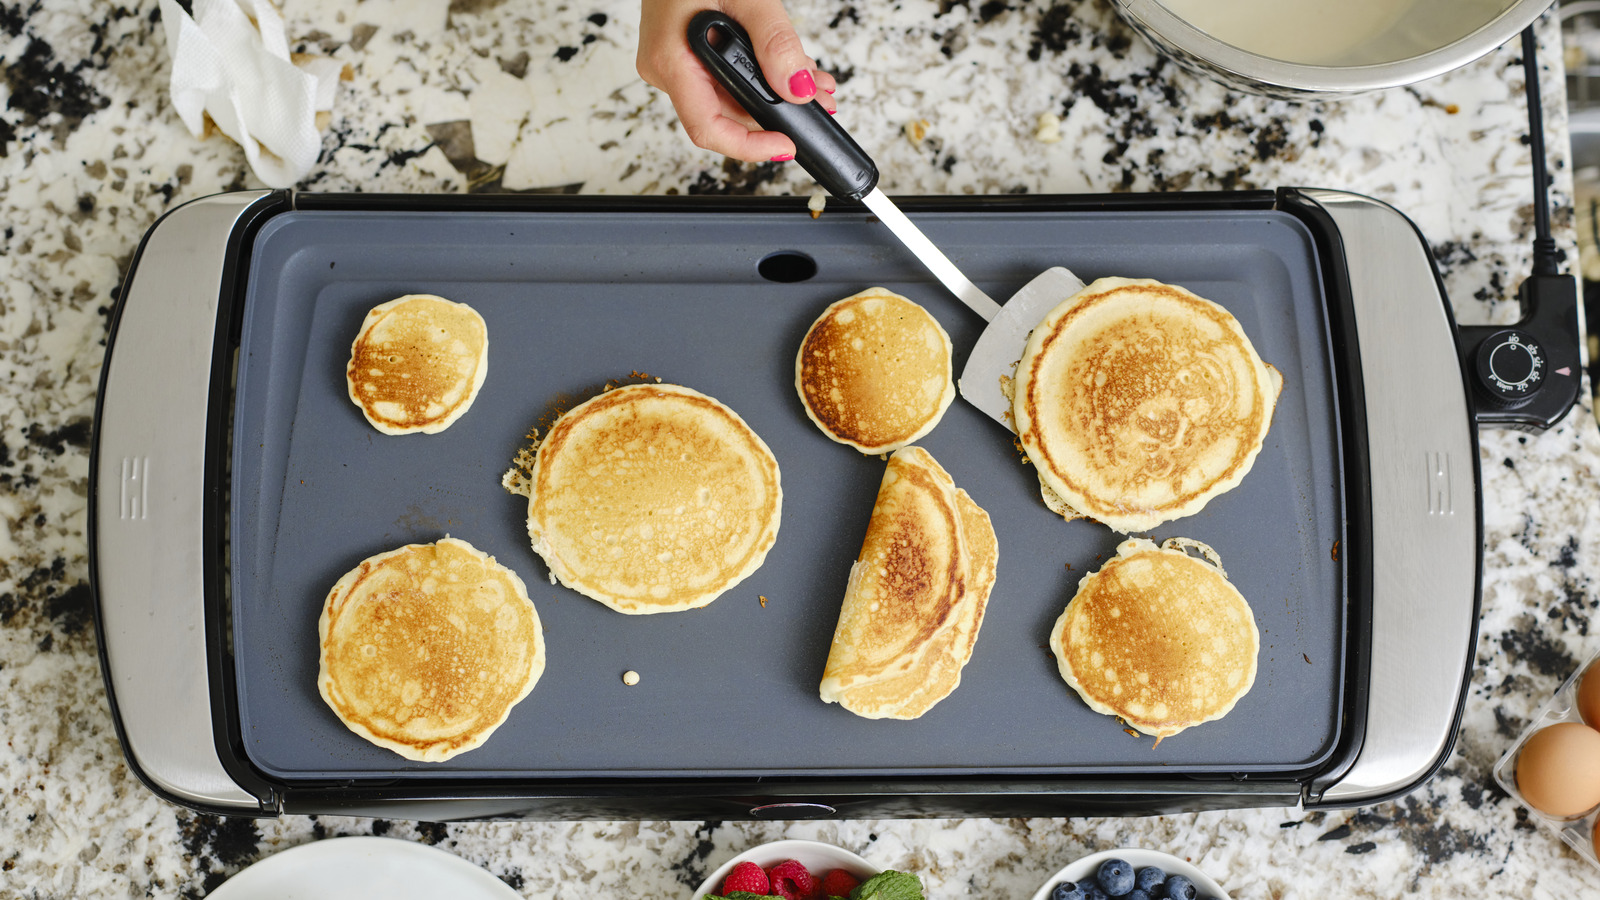 Easy Electric Griddle Dinner Recipes: Top Electric Griddles